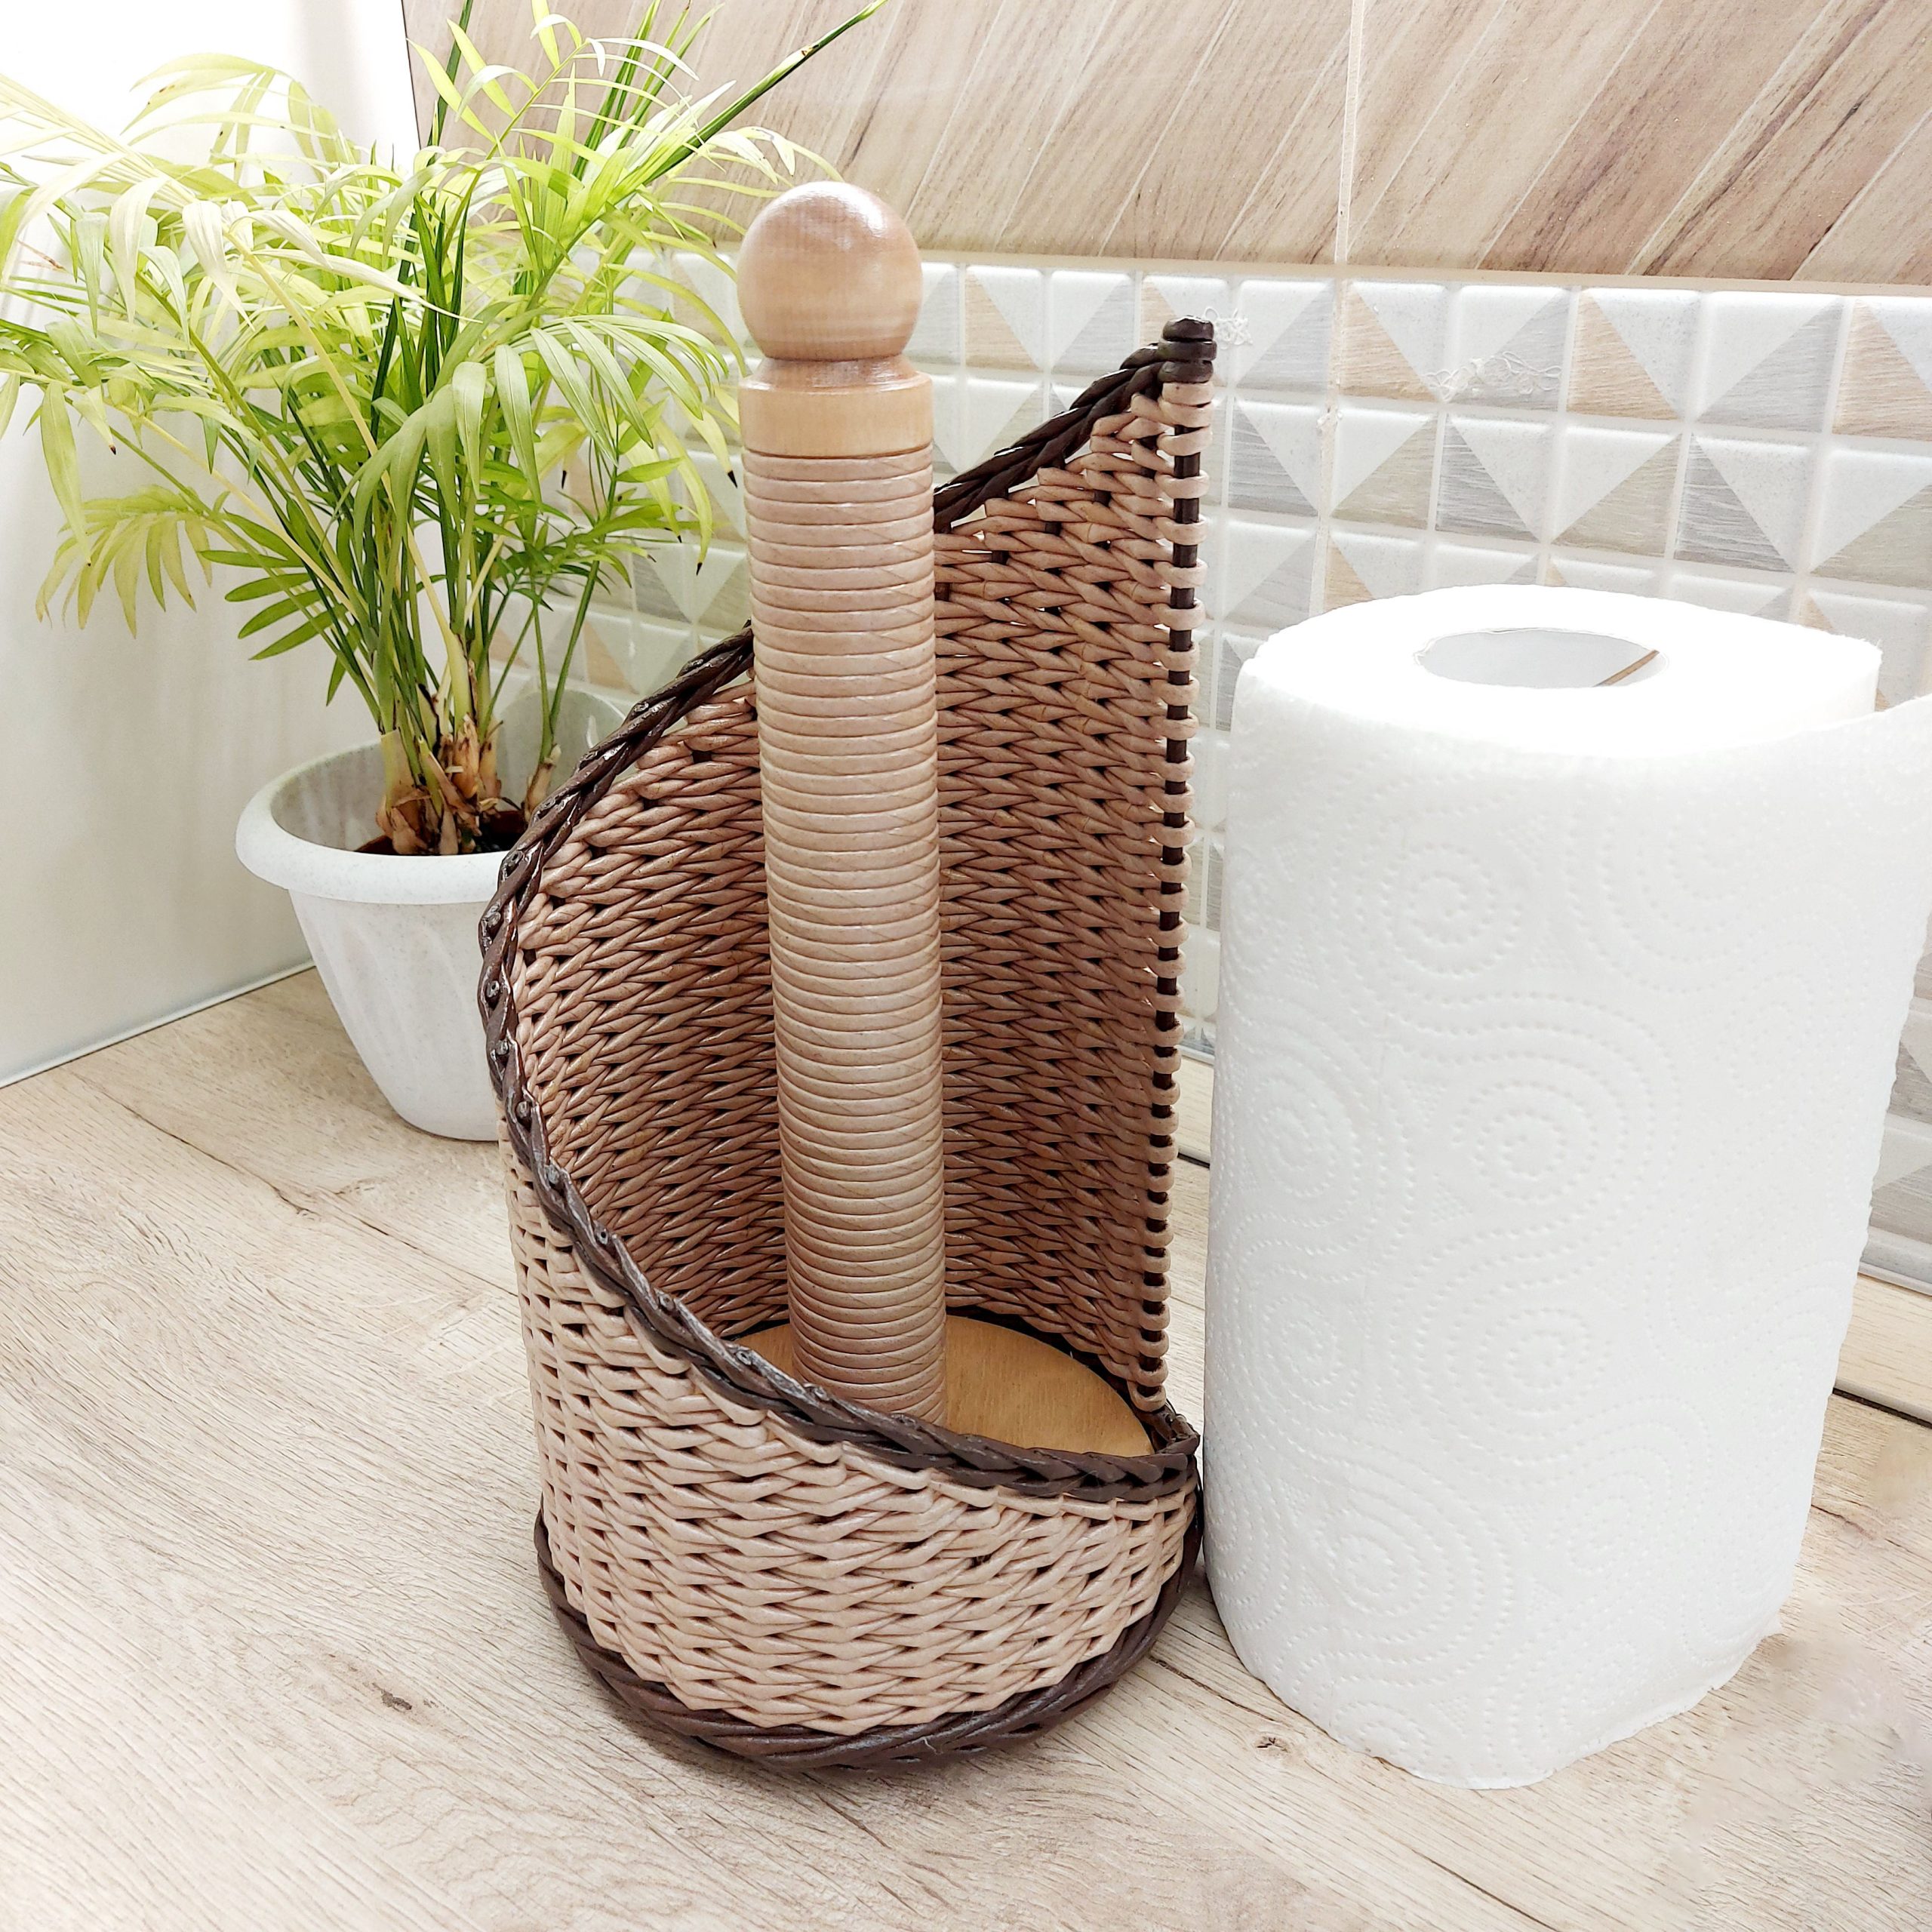 Wicker paper towel holder standing for rustic kitchen decor